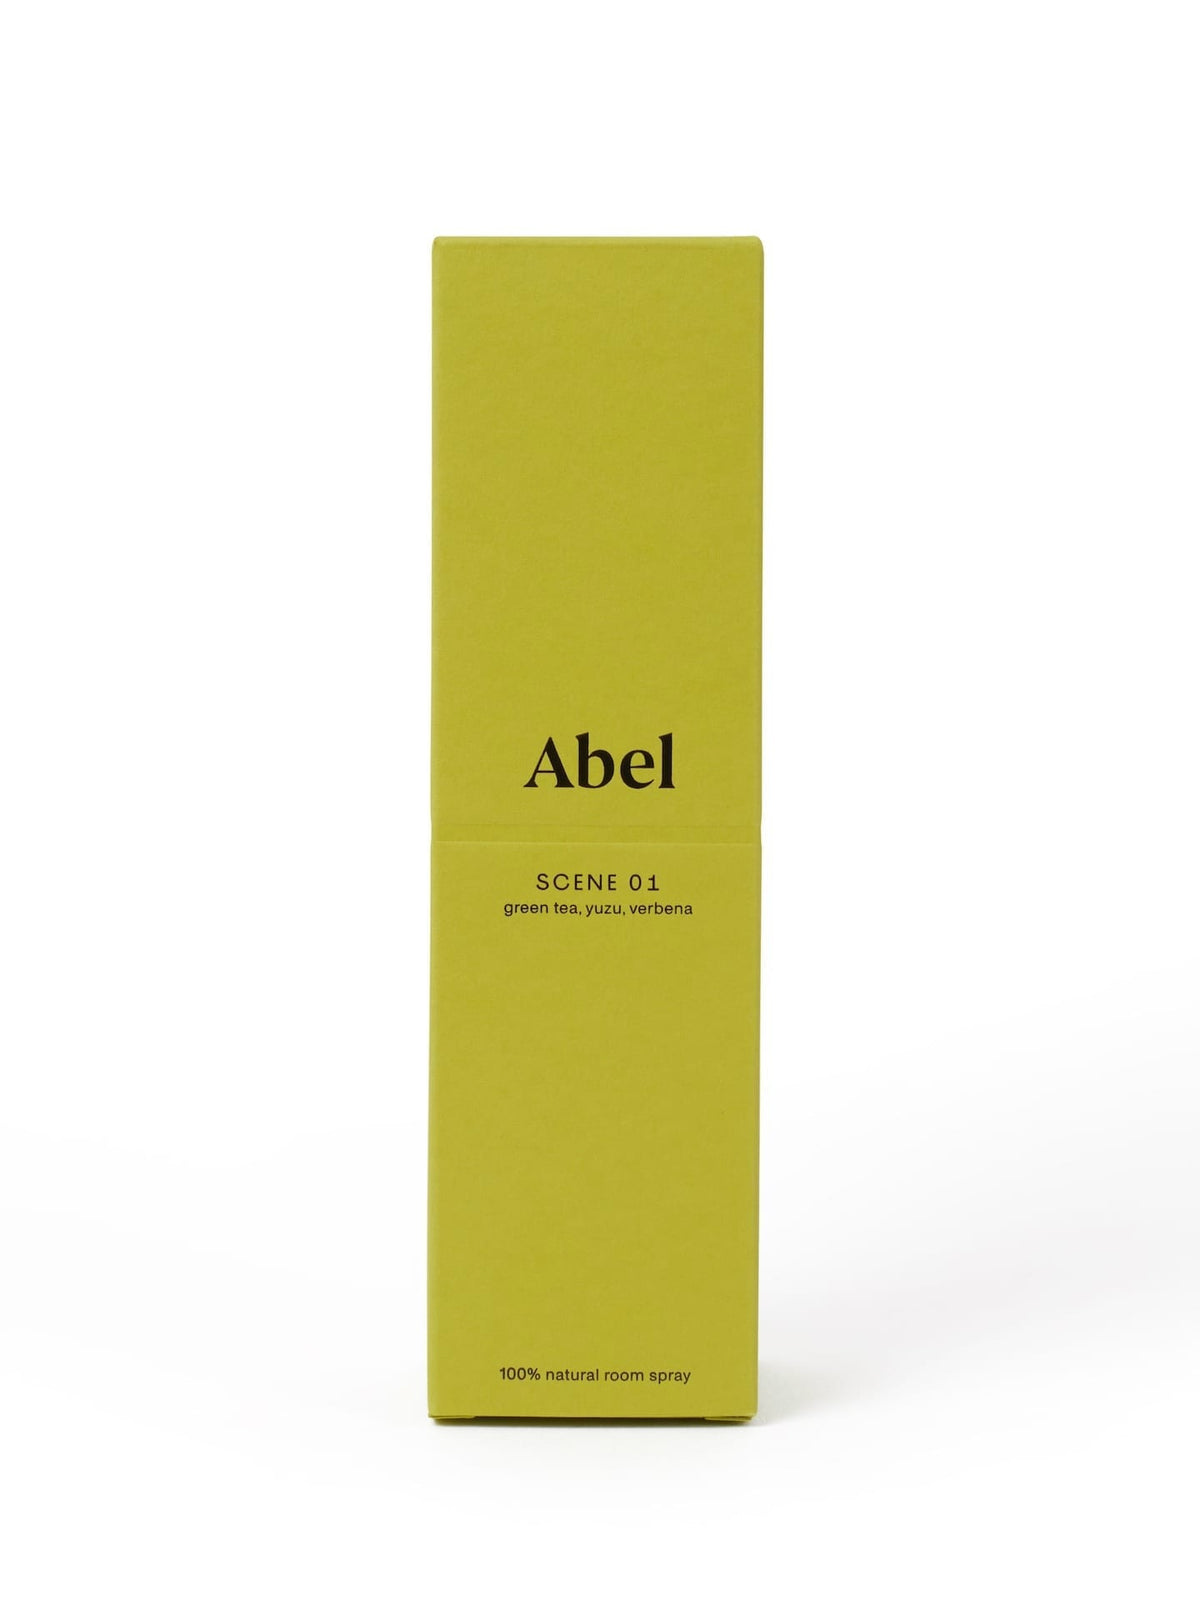 A green packaging box labeled &quot;Abel room spray – Scene 01 ⋅ green tea, yuzu, verbena - 100% natural scent ritual room spray&quot; against a white background.